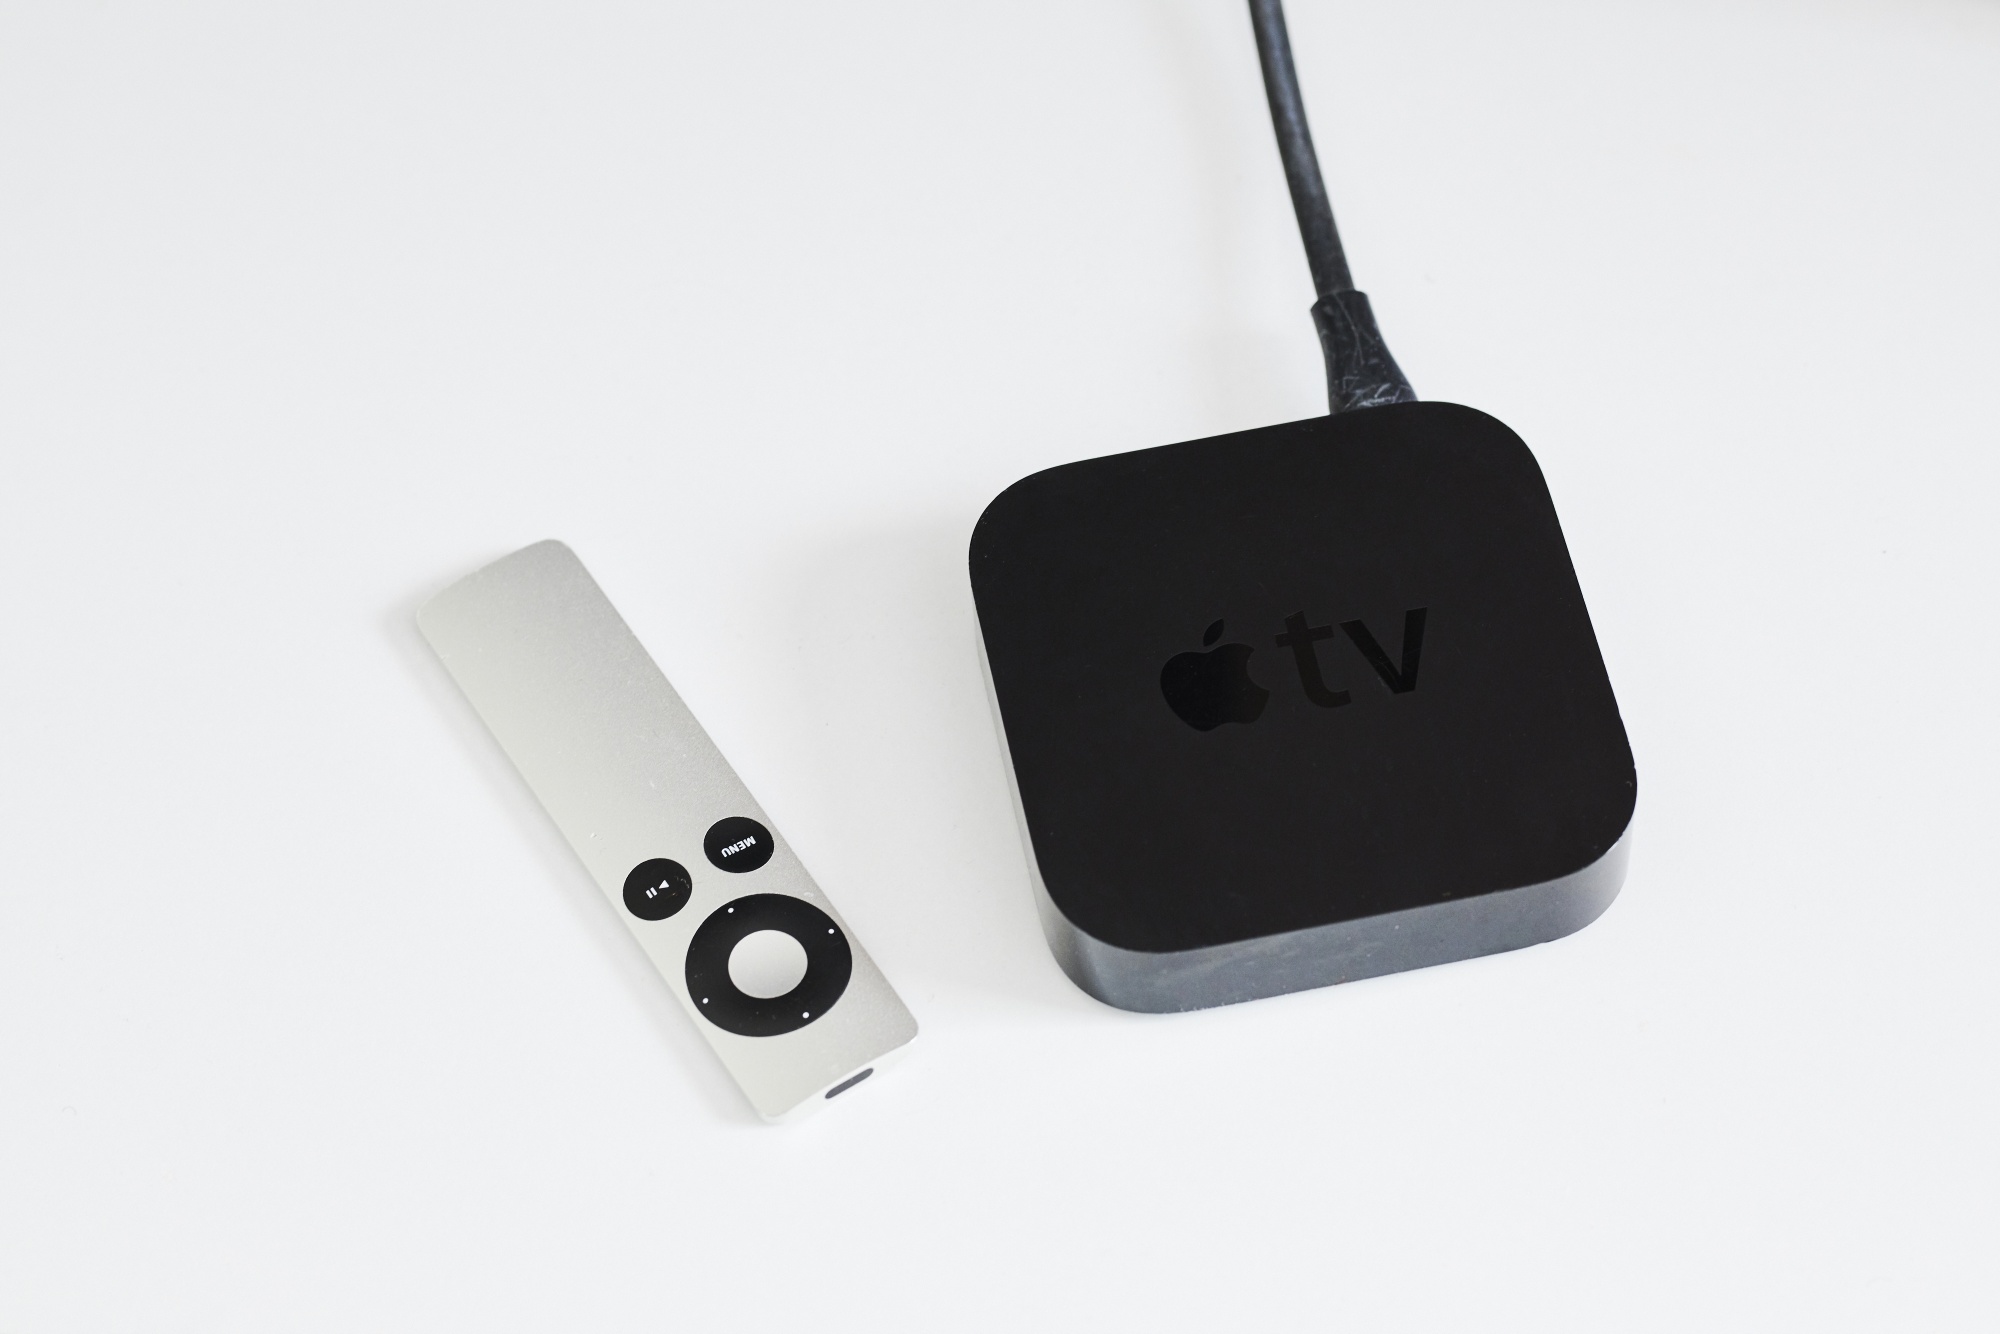 Apple TV Review - IGN